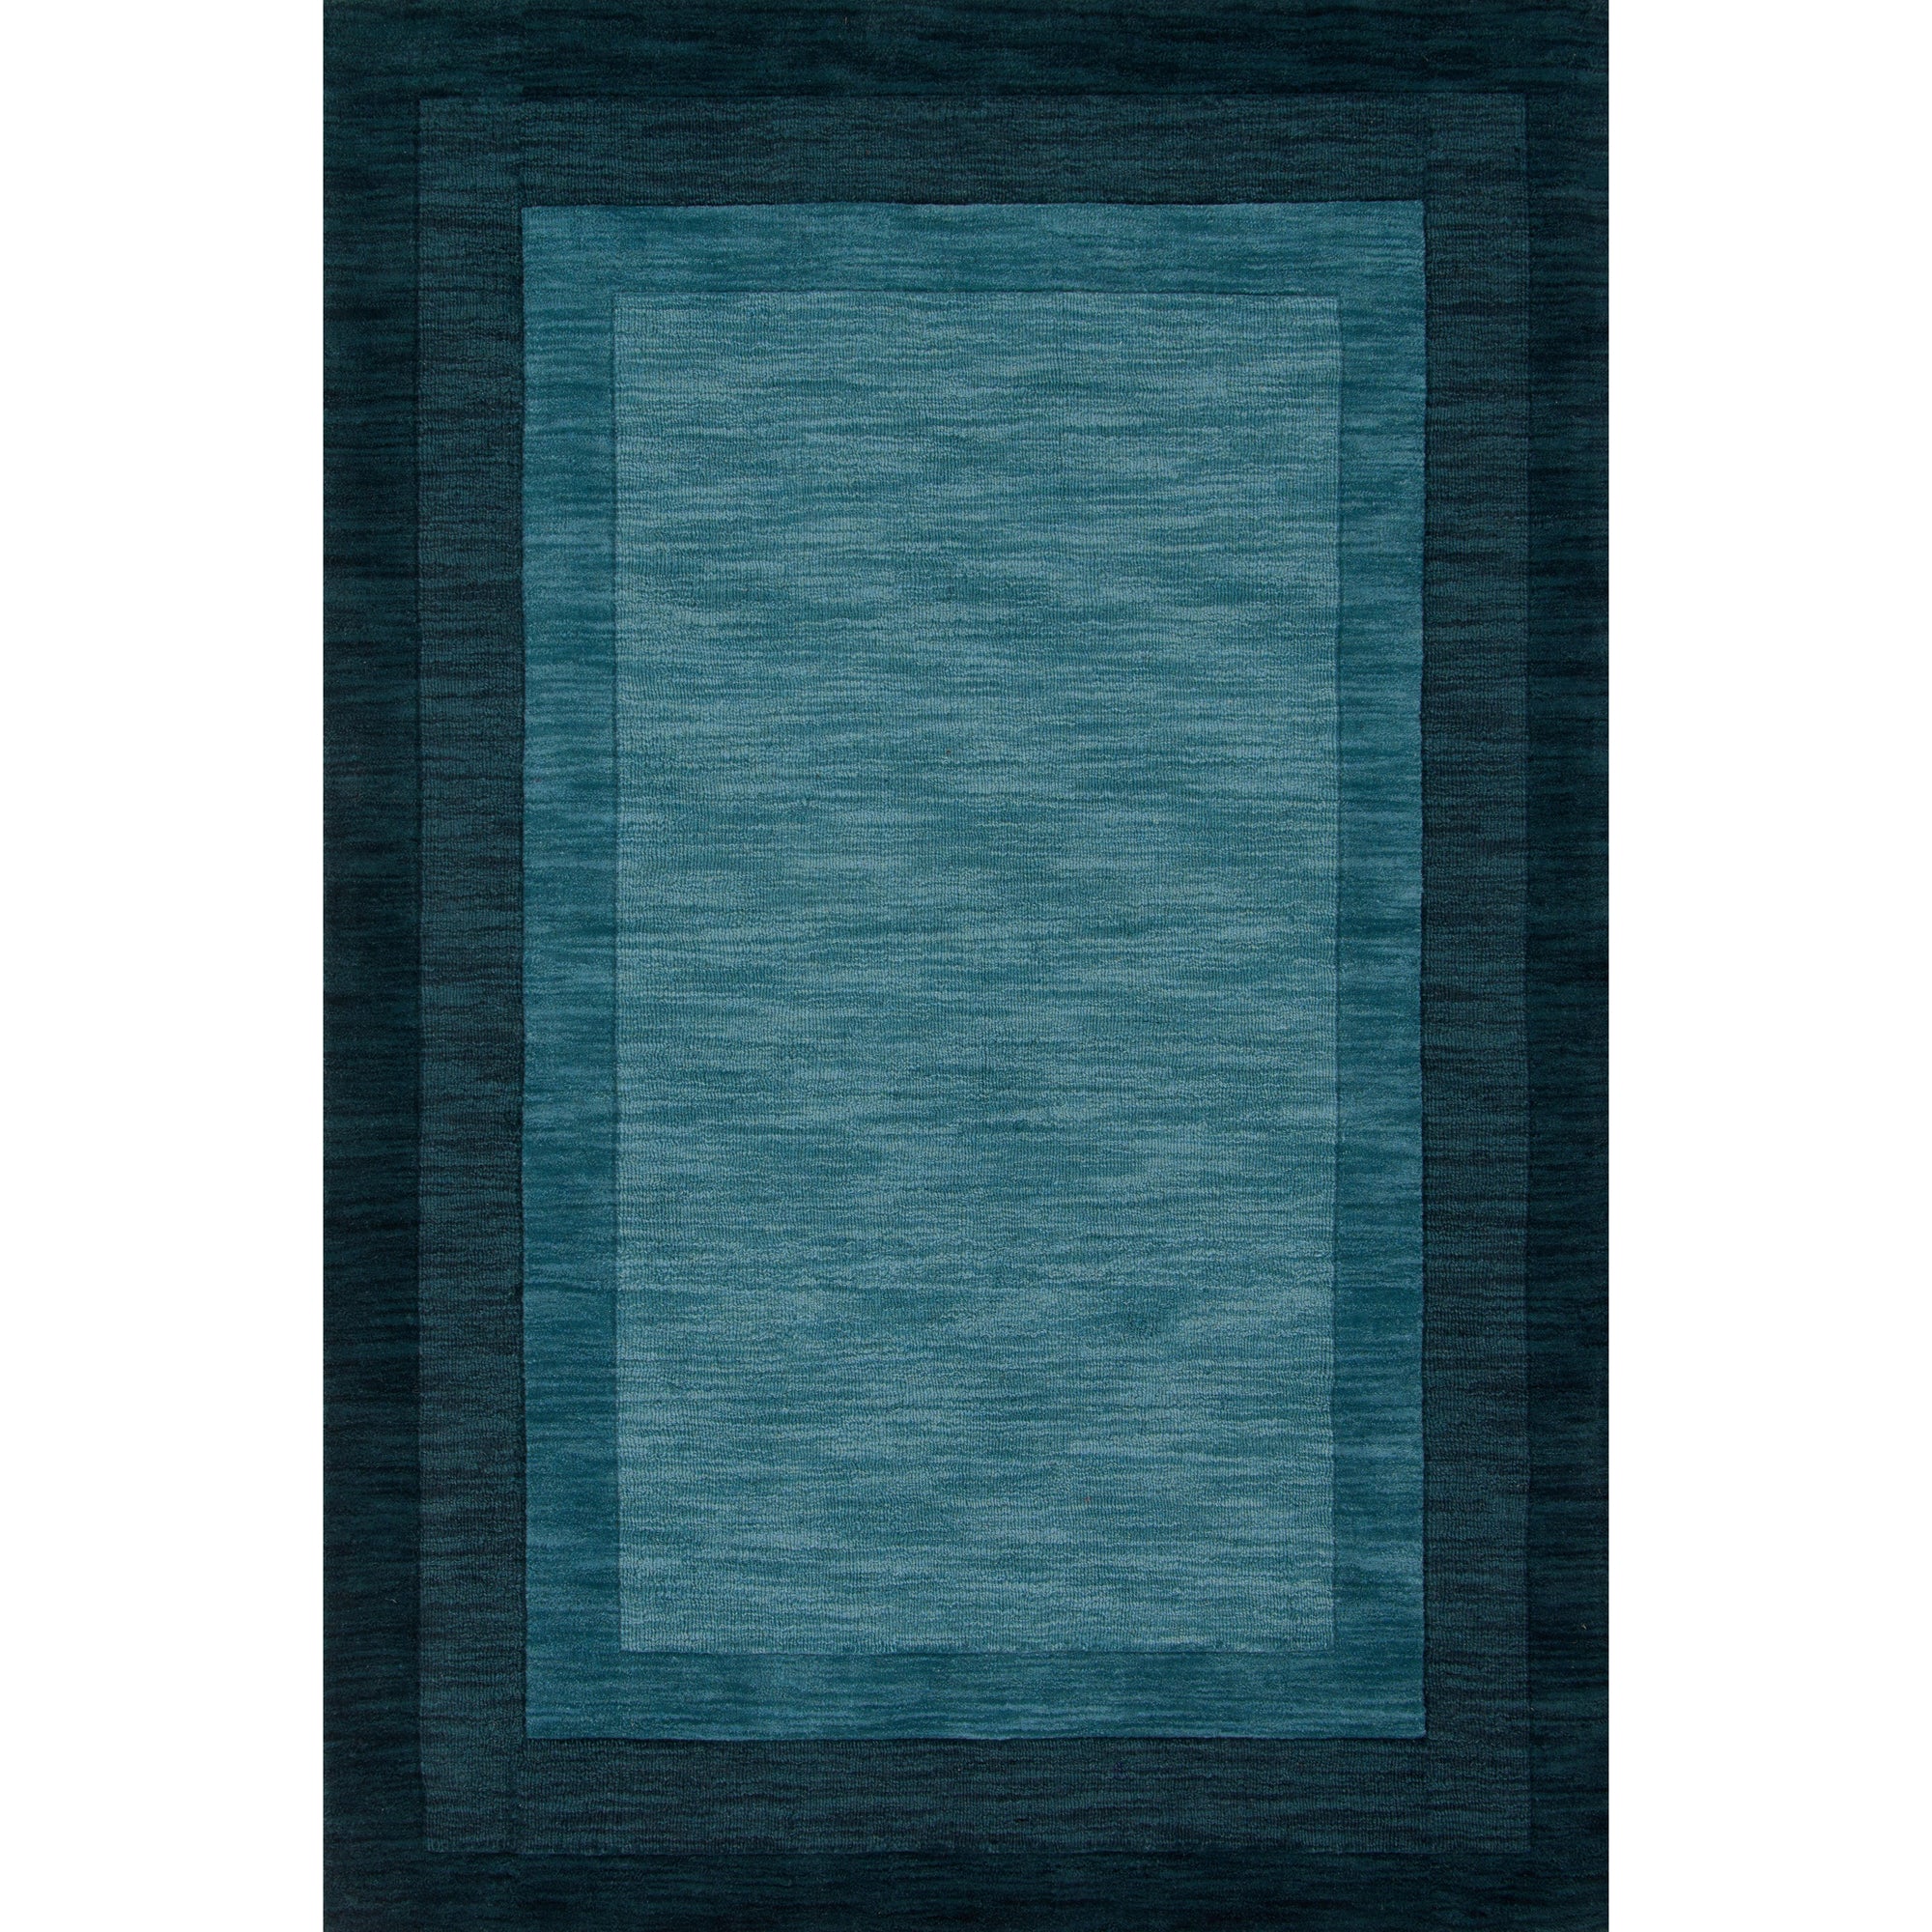 Rugs by Roo Loloi Hamilton Teal Area Rug in size 18" x 18" Sample